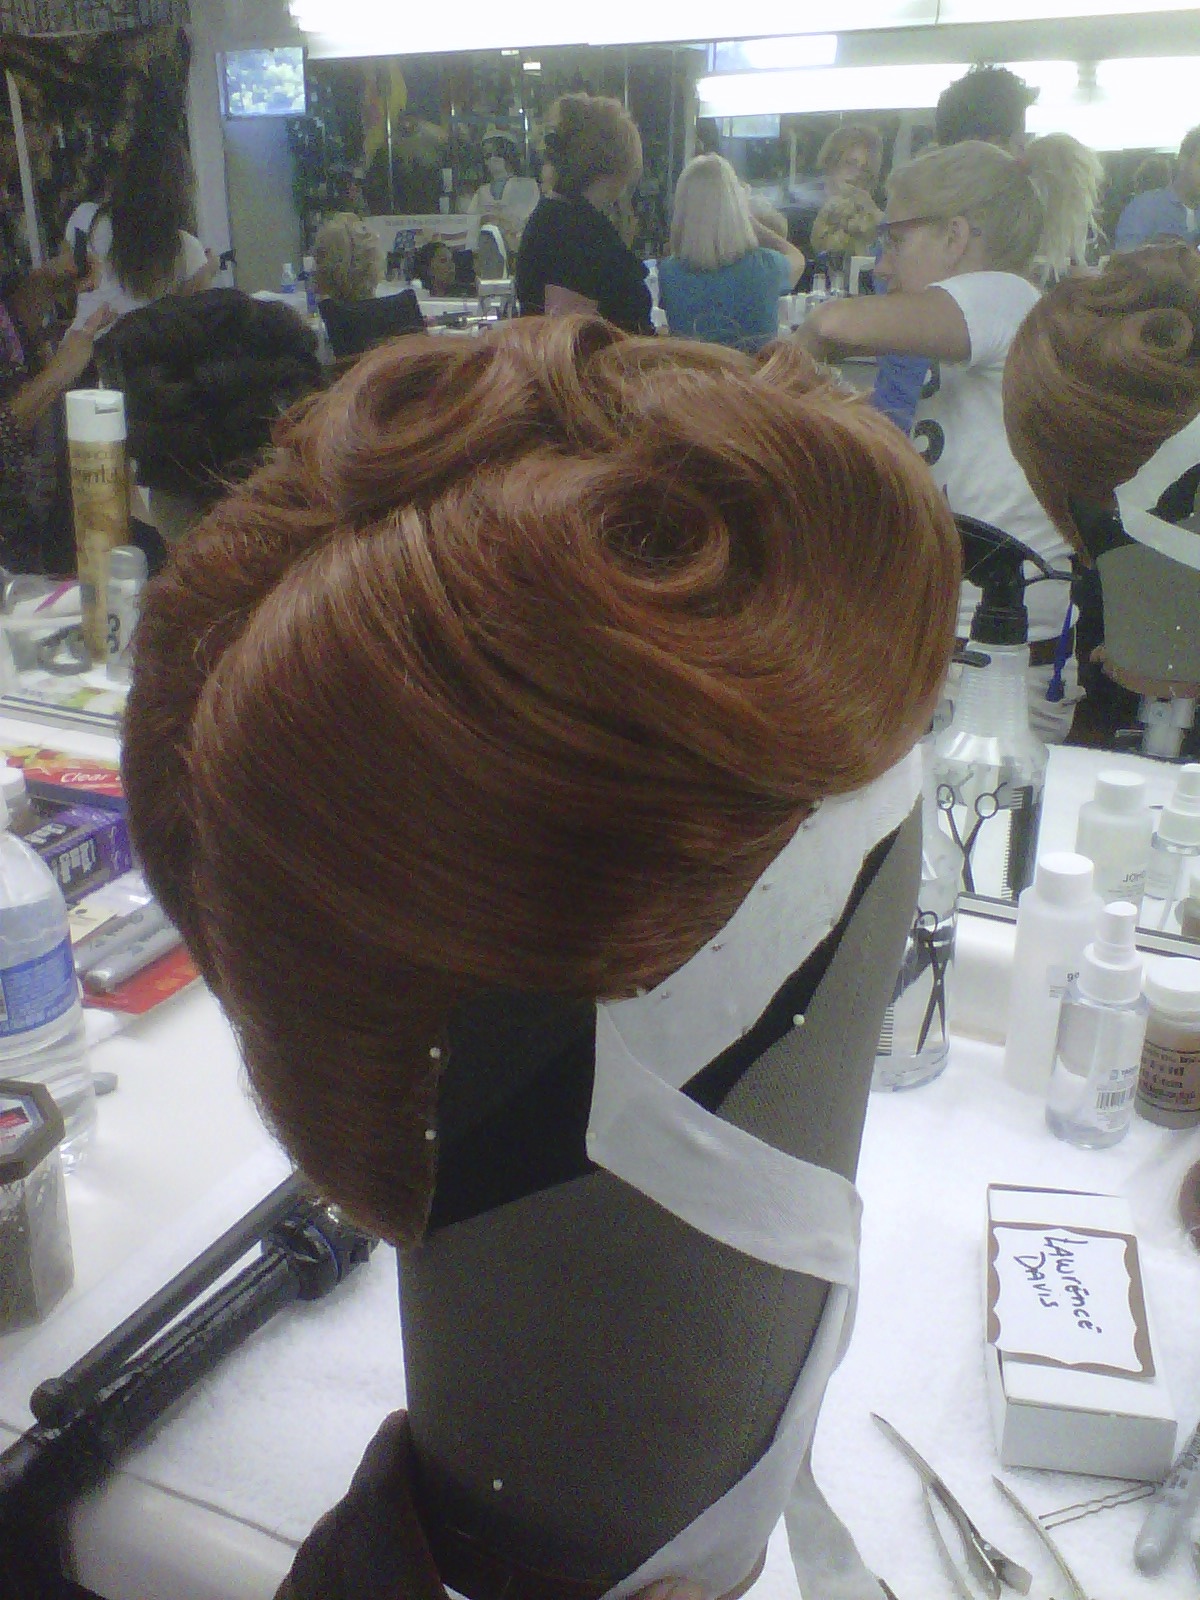 Period wig styling